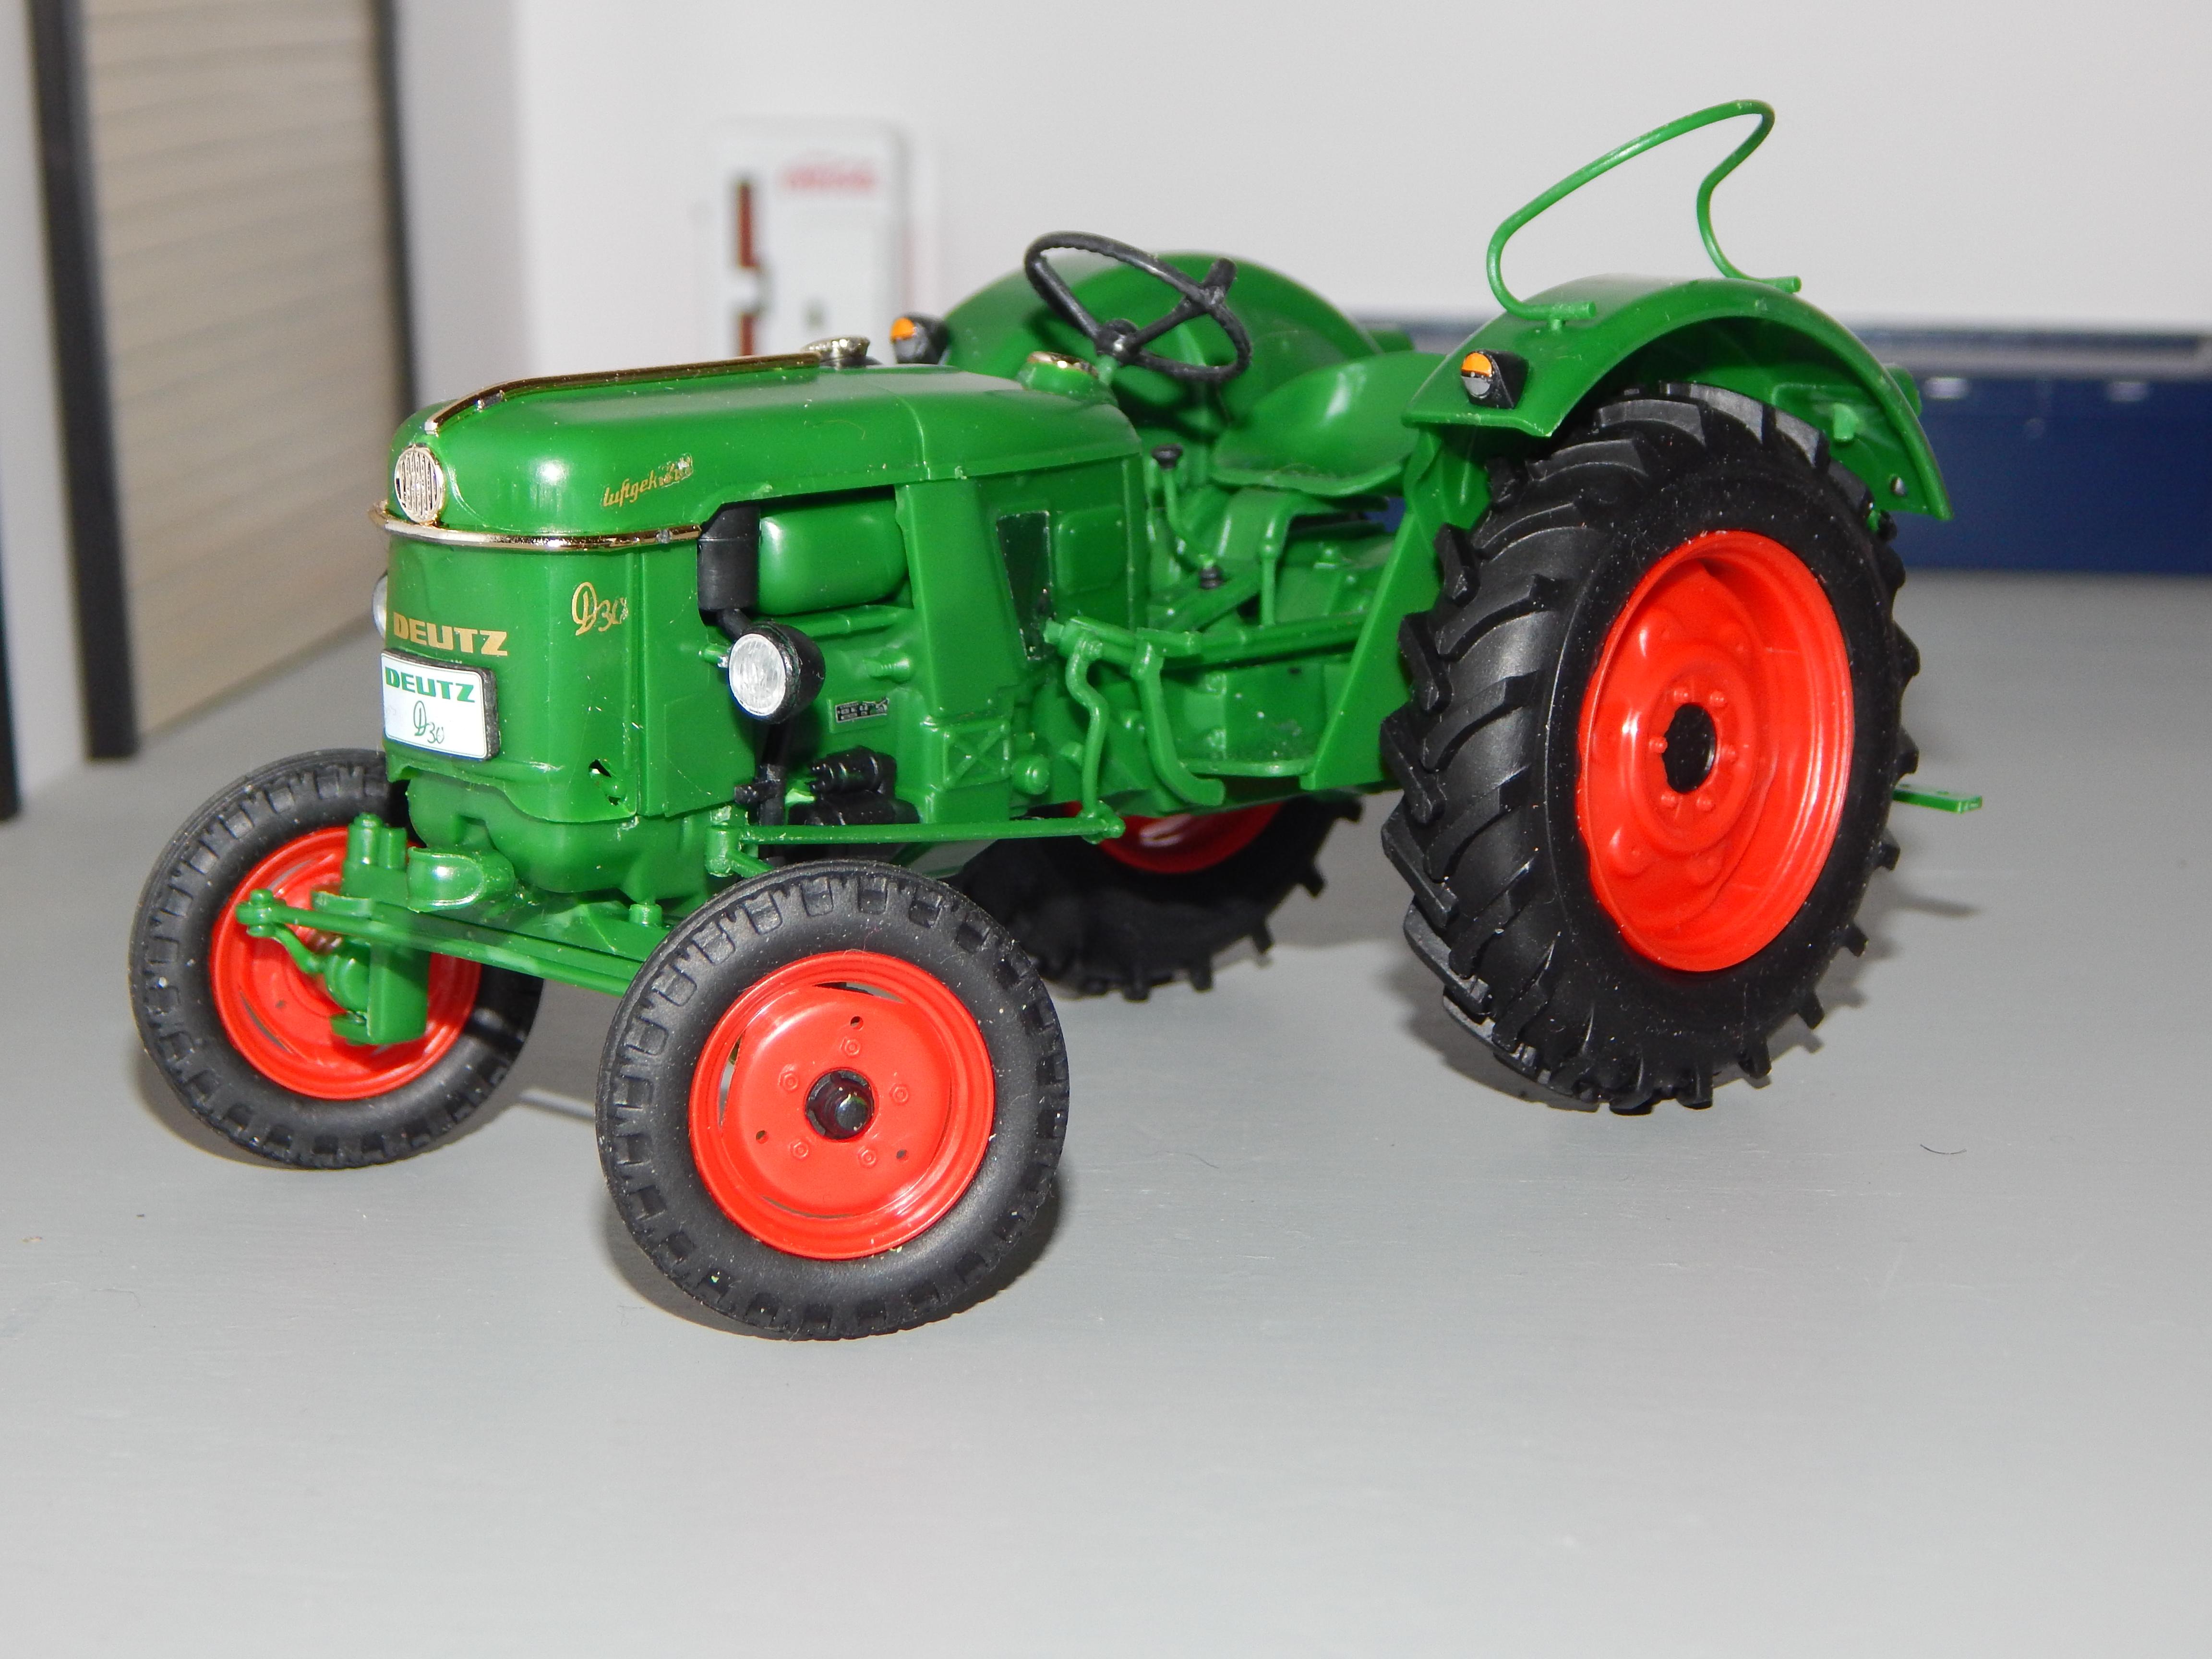 Deutz D30 - All The Rest: Motorcycles, Aviation, Military, Sci-Fi, Figures  - Model Cars Magazine Forum